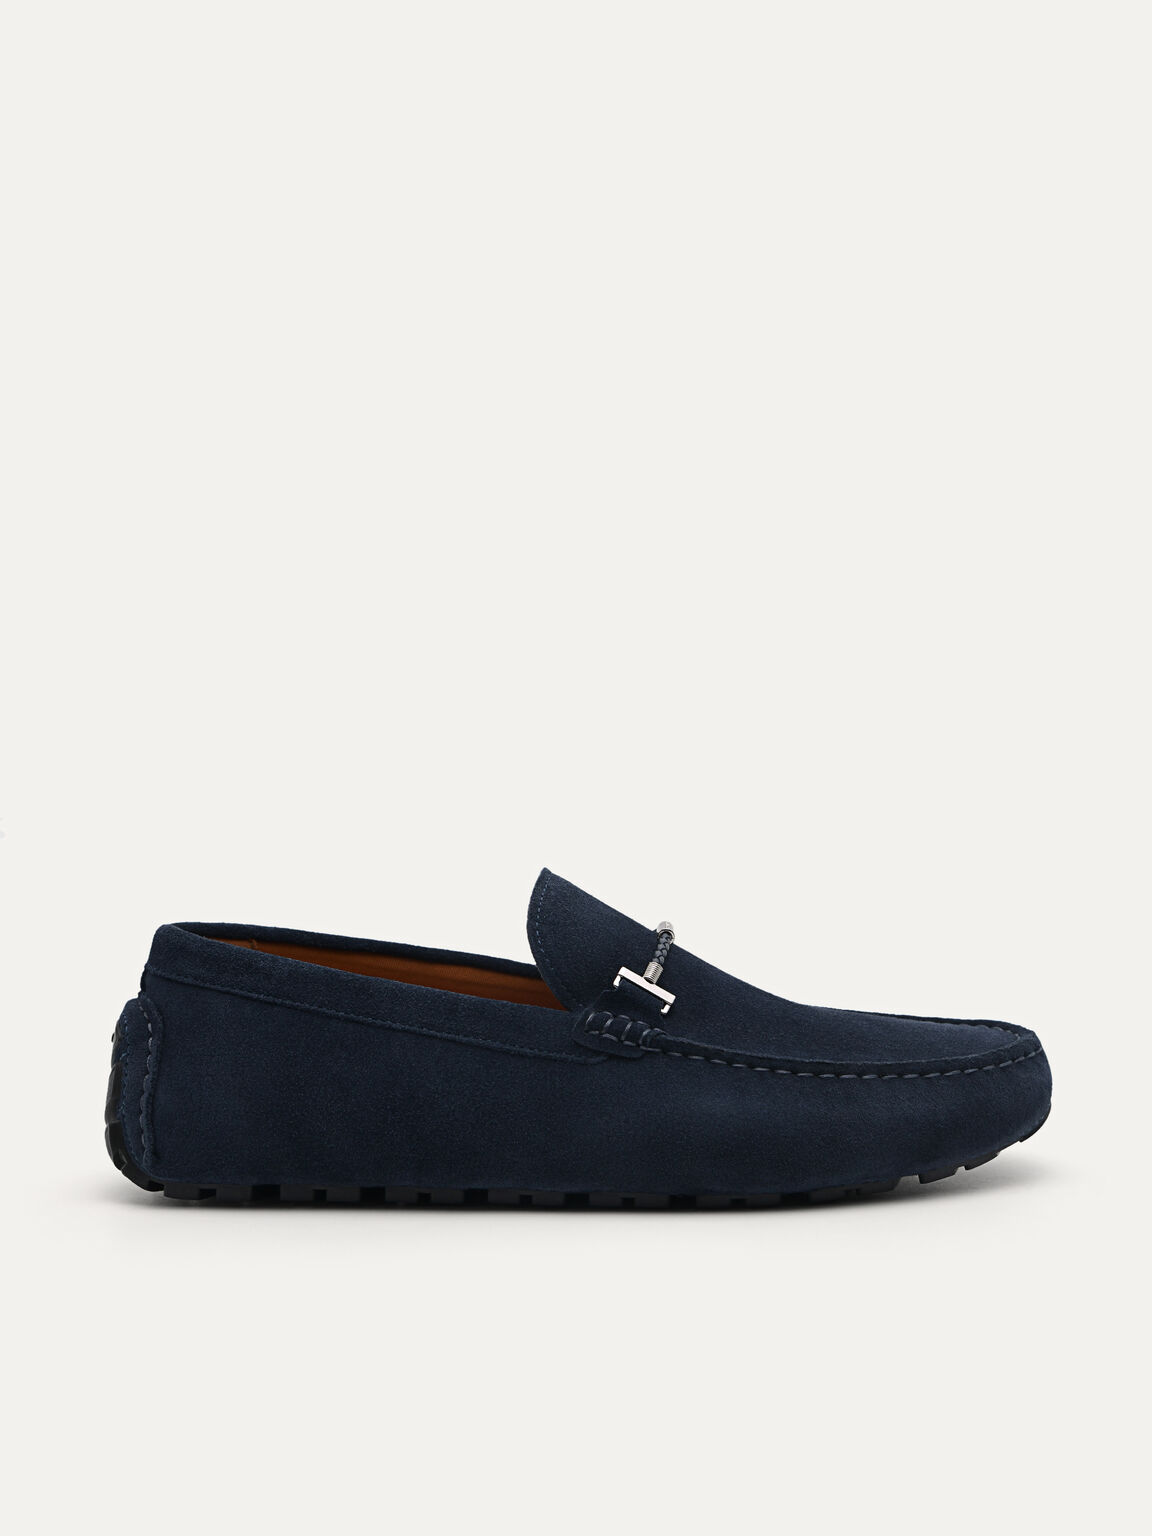 Suede Leather Moccasins, Navy